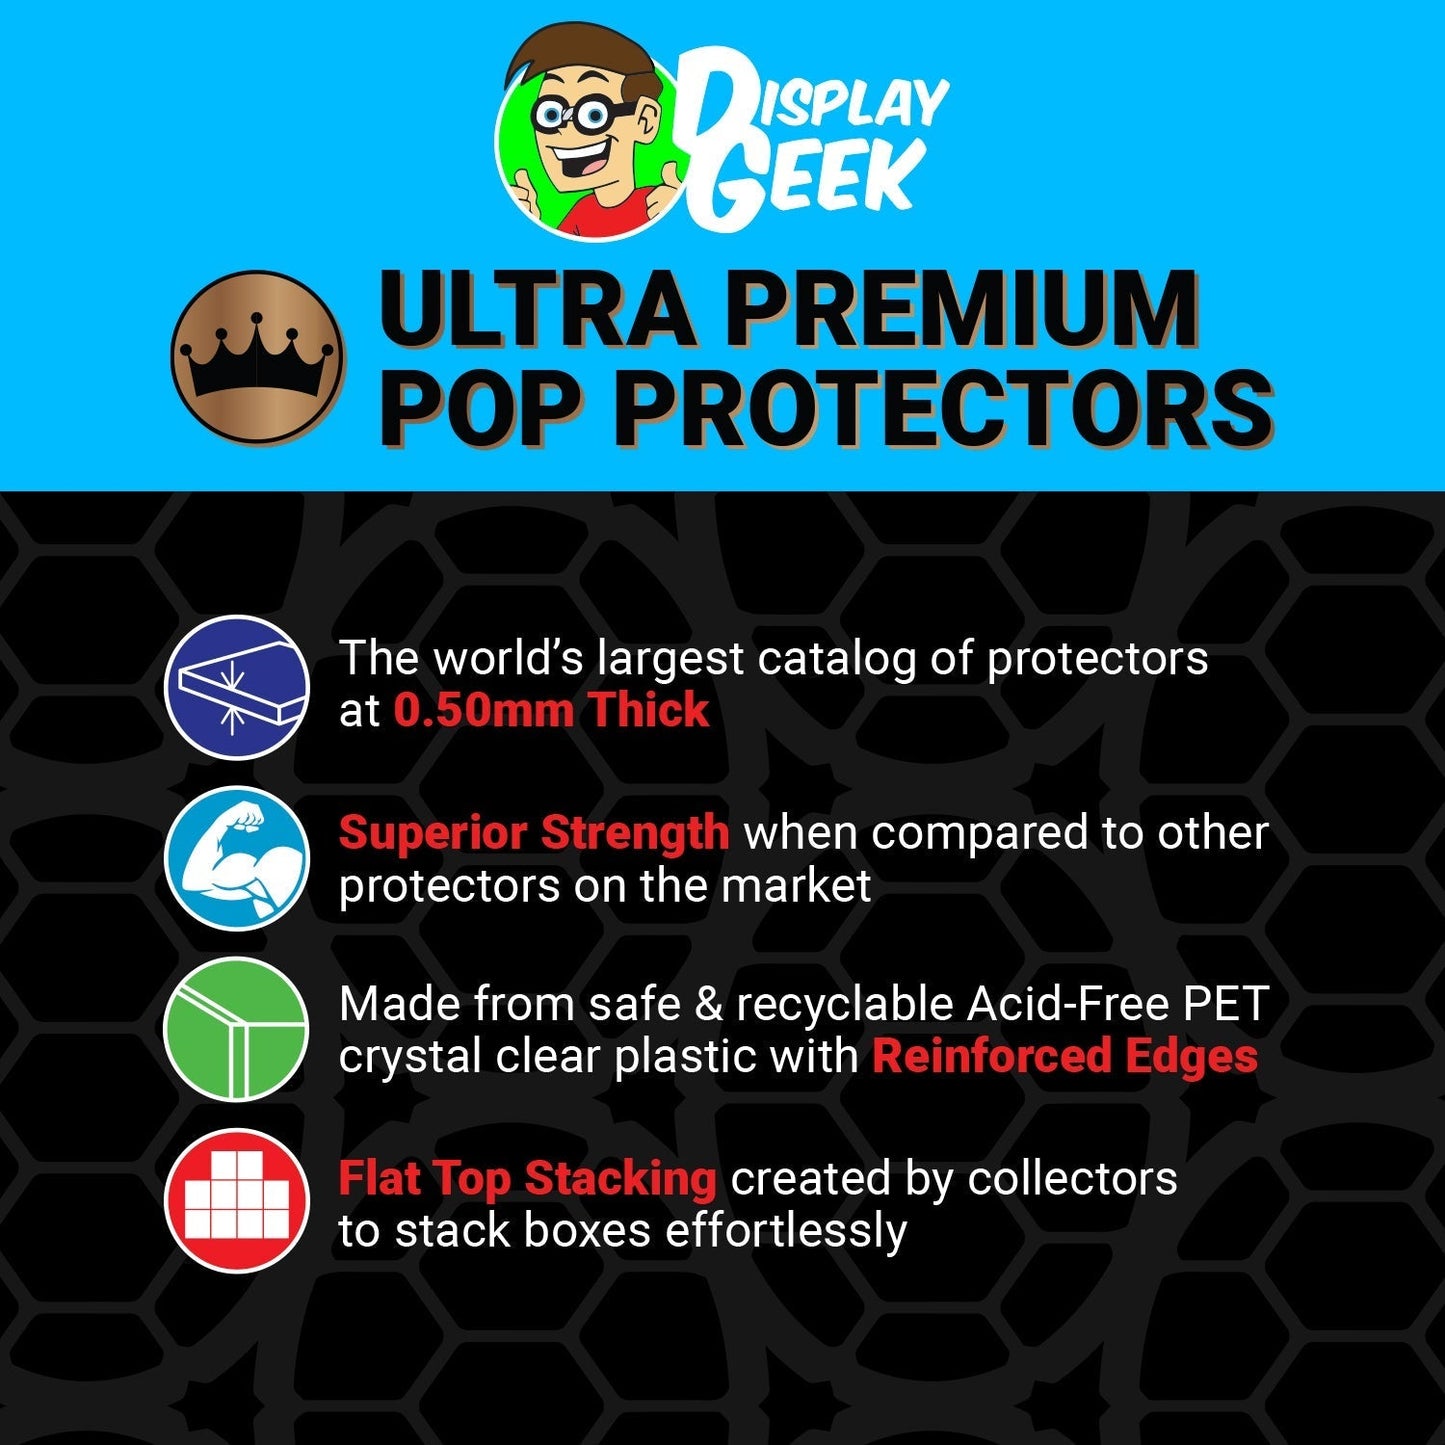 Pop Protector for Cinderella with Jaq #12 Funko Pop Movie Posters - PPG Pop Protector Guide Search Created by Display Geek